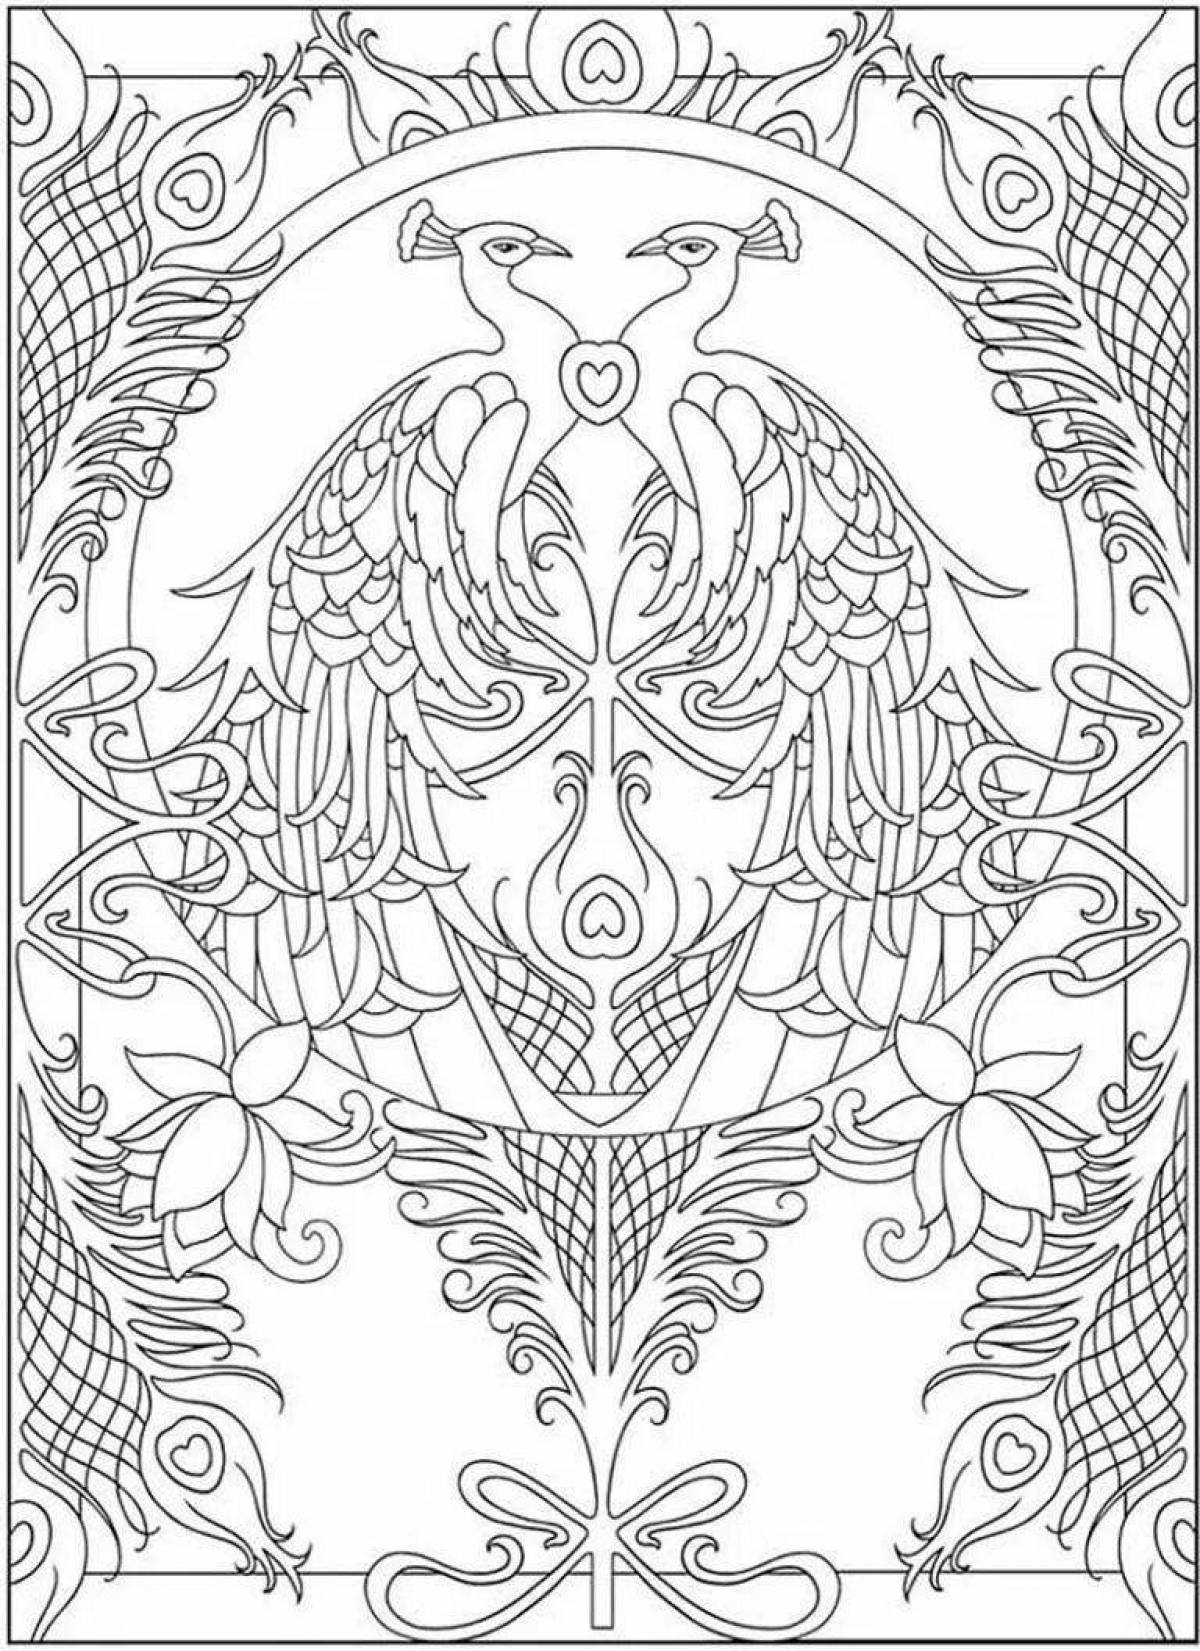 Relaxing meditative coloring book for adults